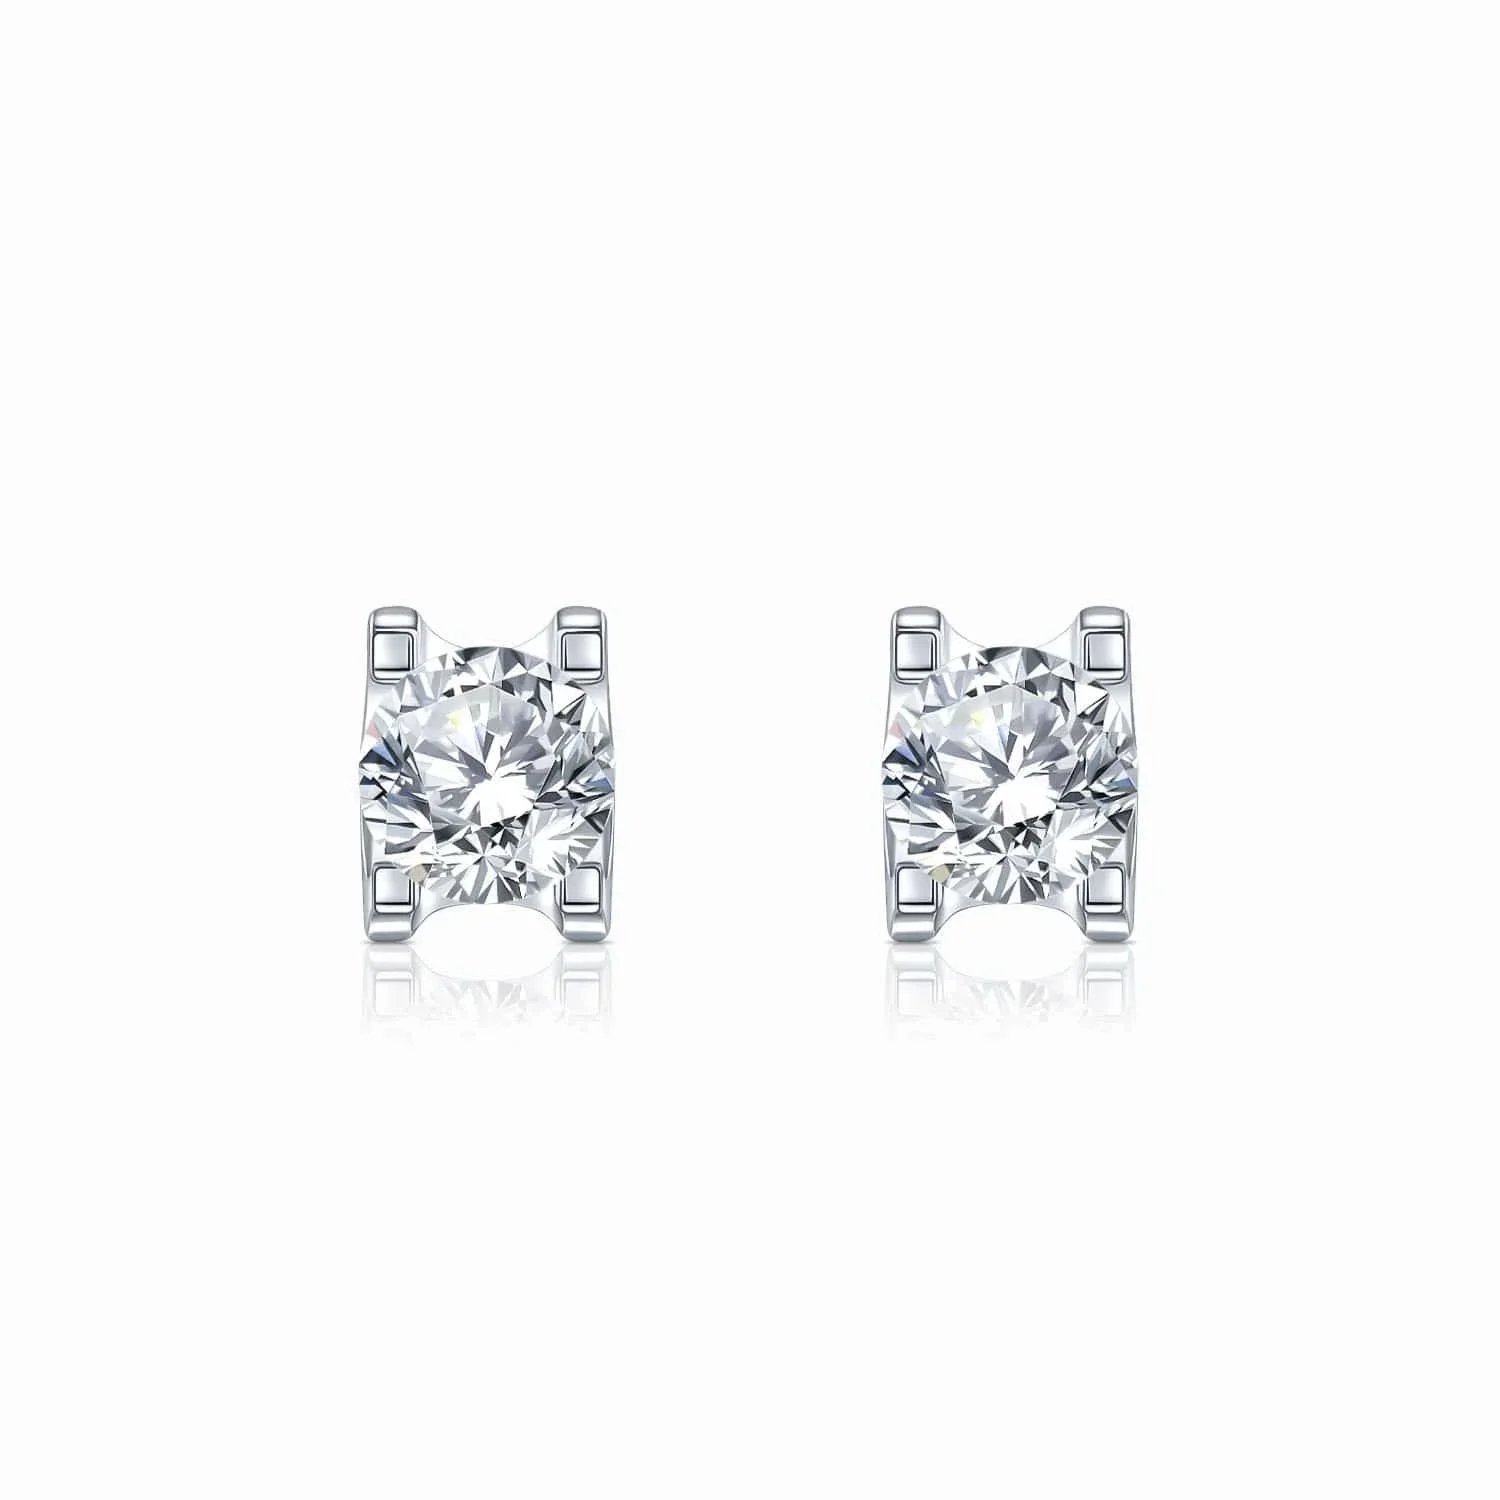 LaneWoods 925 Silver Four Prong Round Moissanite Earring